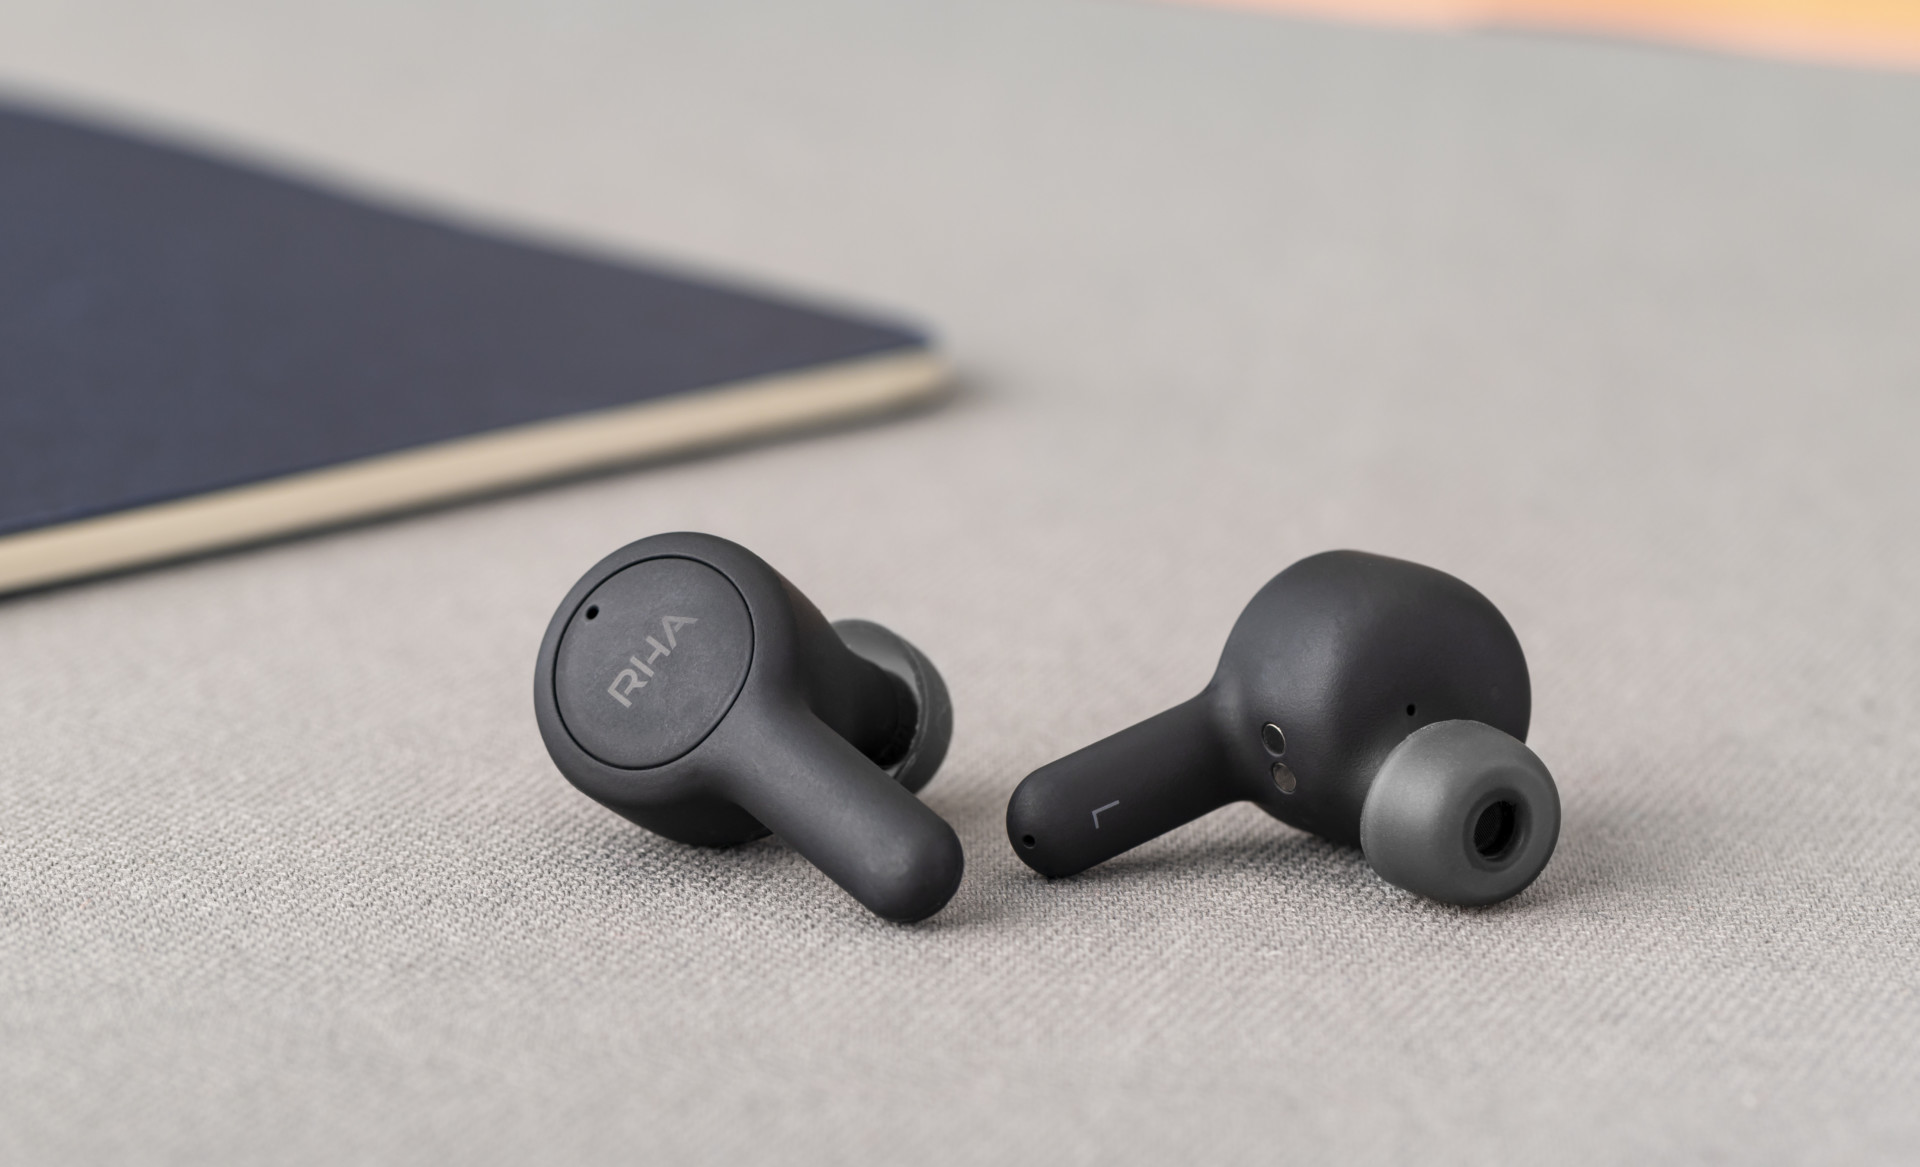 RHA TrueConnect: The earbuds on a beige surface.